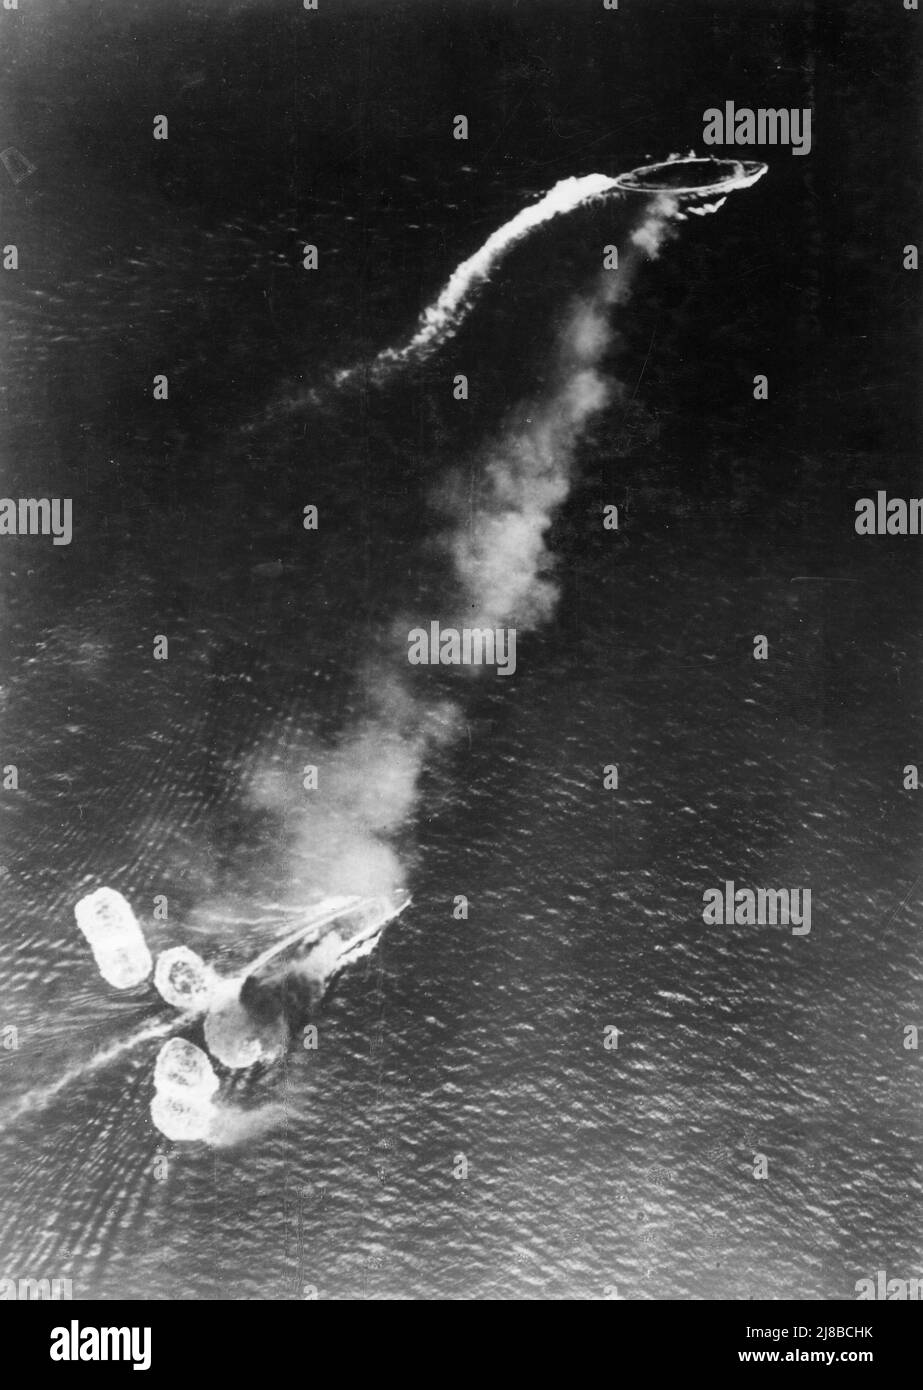 Loss of HMS Prince of Wales and HMS Repulse, 10 December 1941: Photograph taken from a Japanese aircraft during the initial high-level bombing attack. The battlecruiser Repulse, near the bottom of the view, has just been hit by one bomb and near-missed by several more. The battleship Prince of Wales is near the top of the image, generating a considerable amount of smoke. Stock Photo